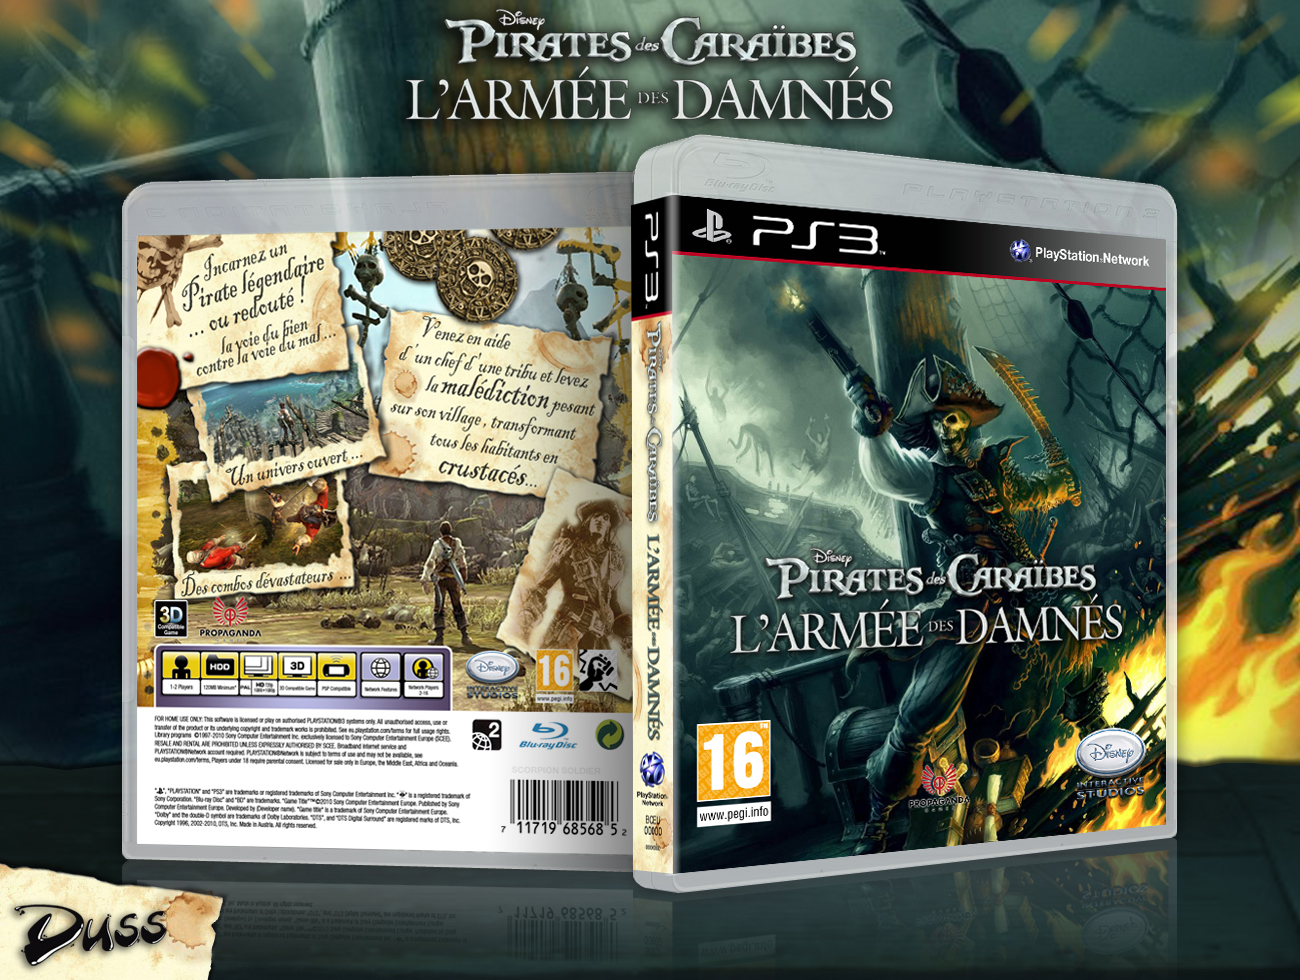 Pirates of the Caribbean: Armada of the Damned box cover